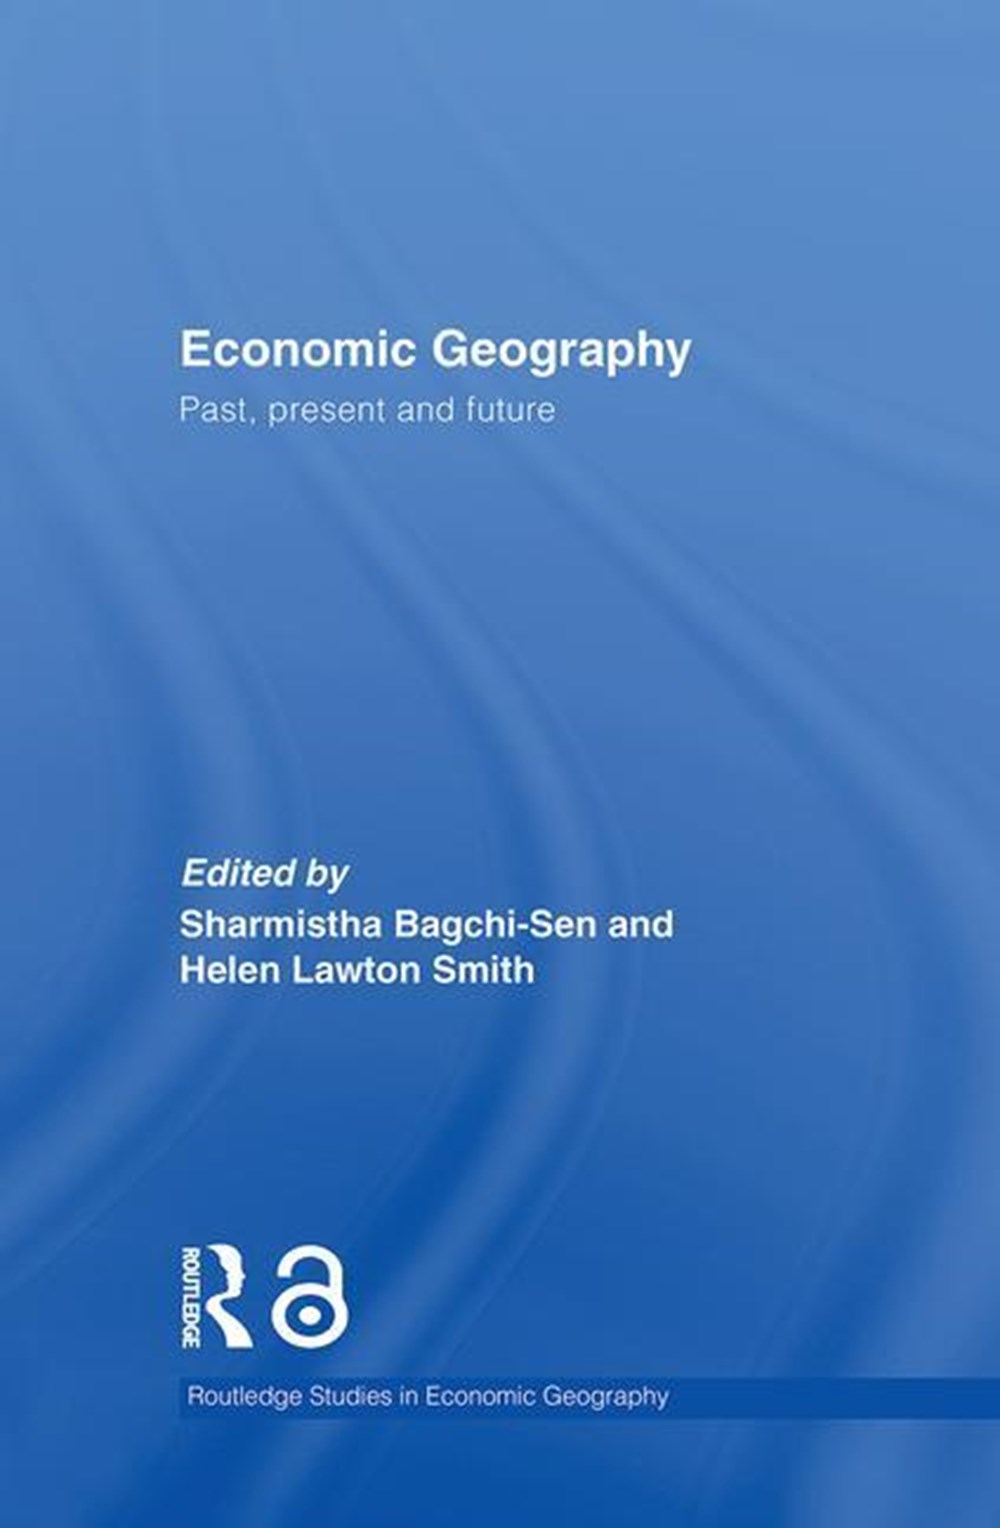 Economic Geography Past, Present and Future